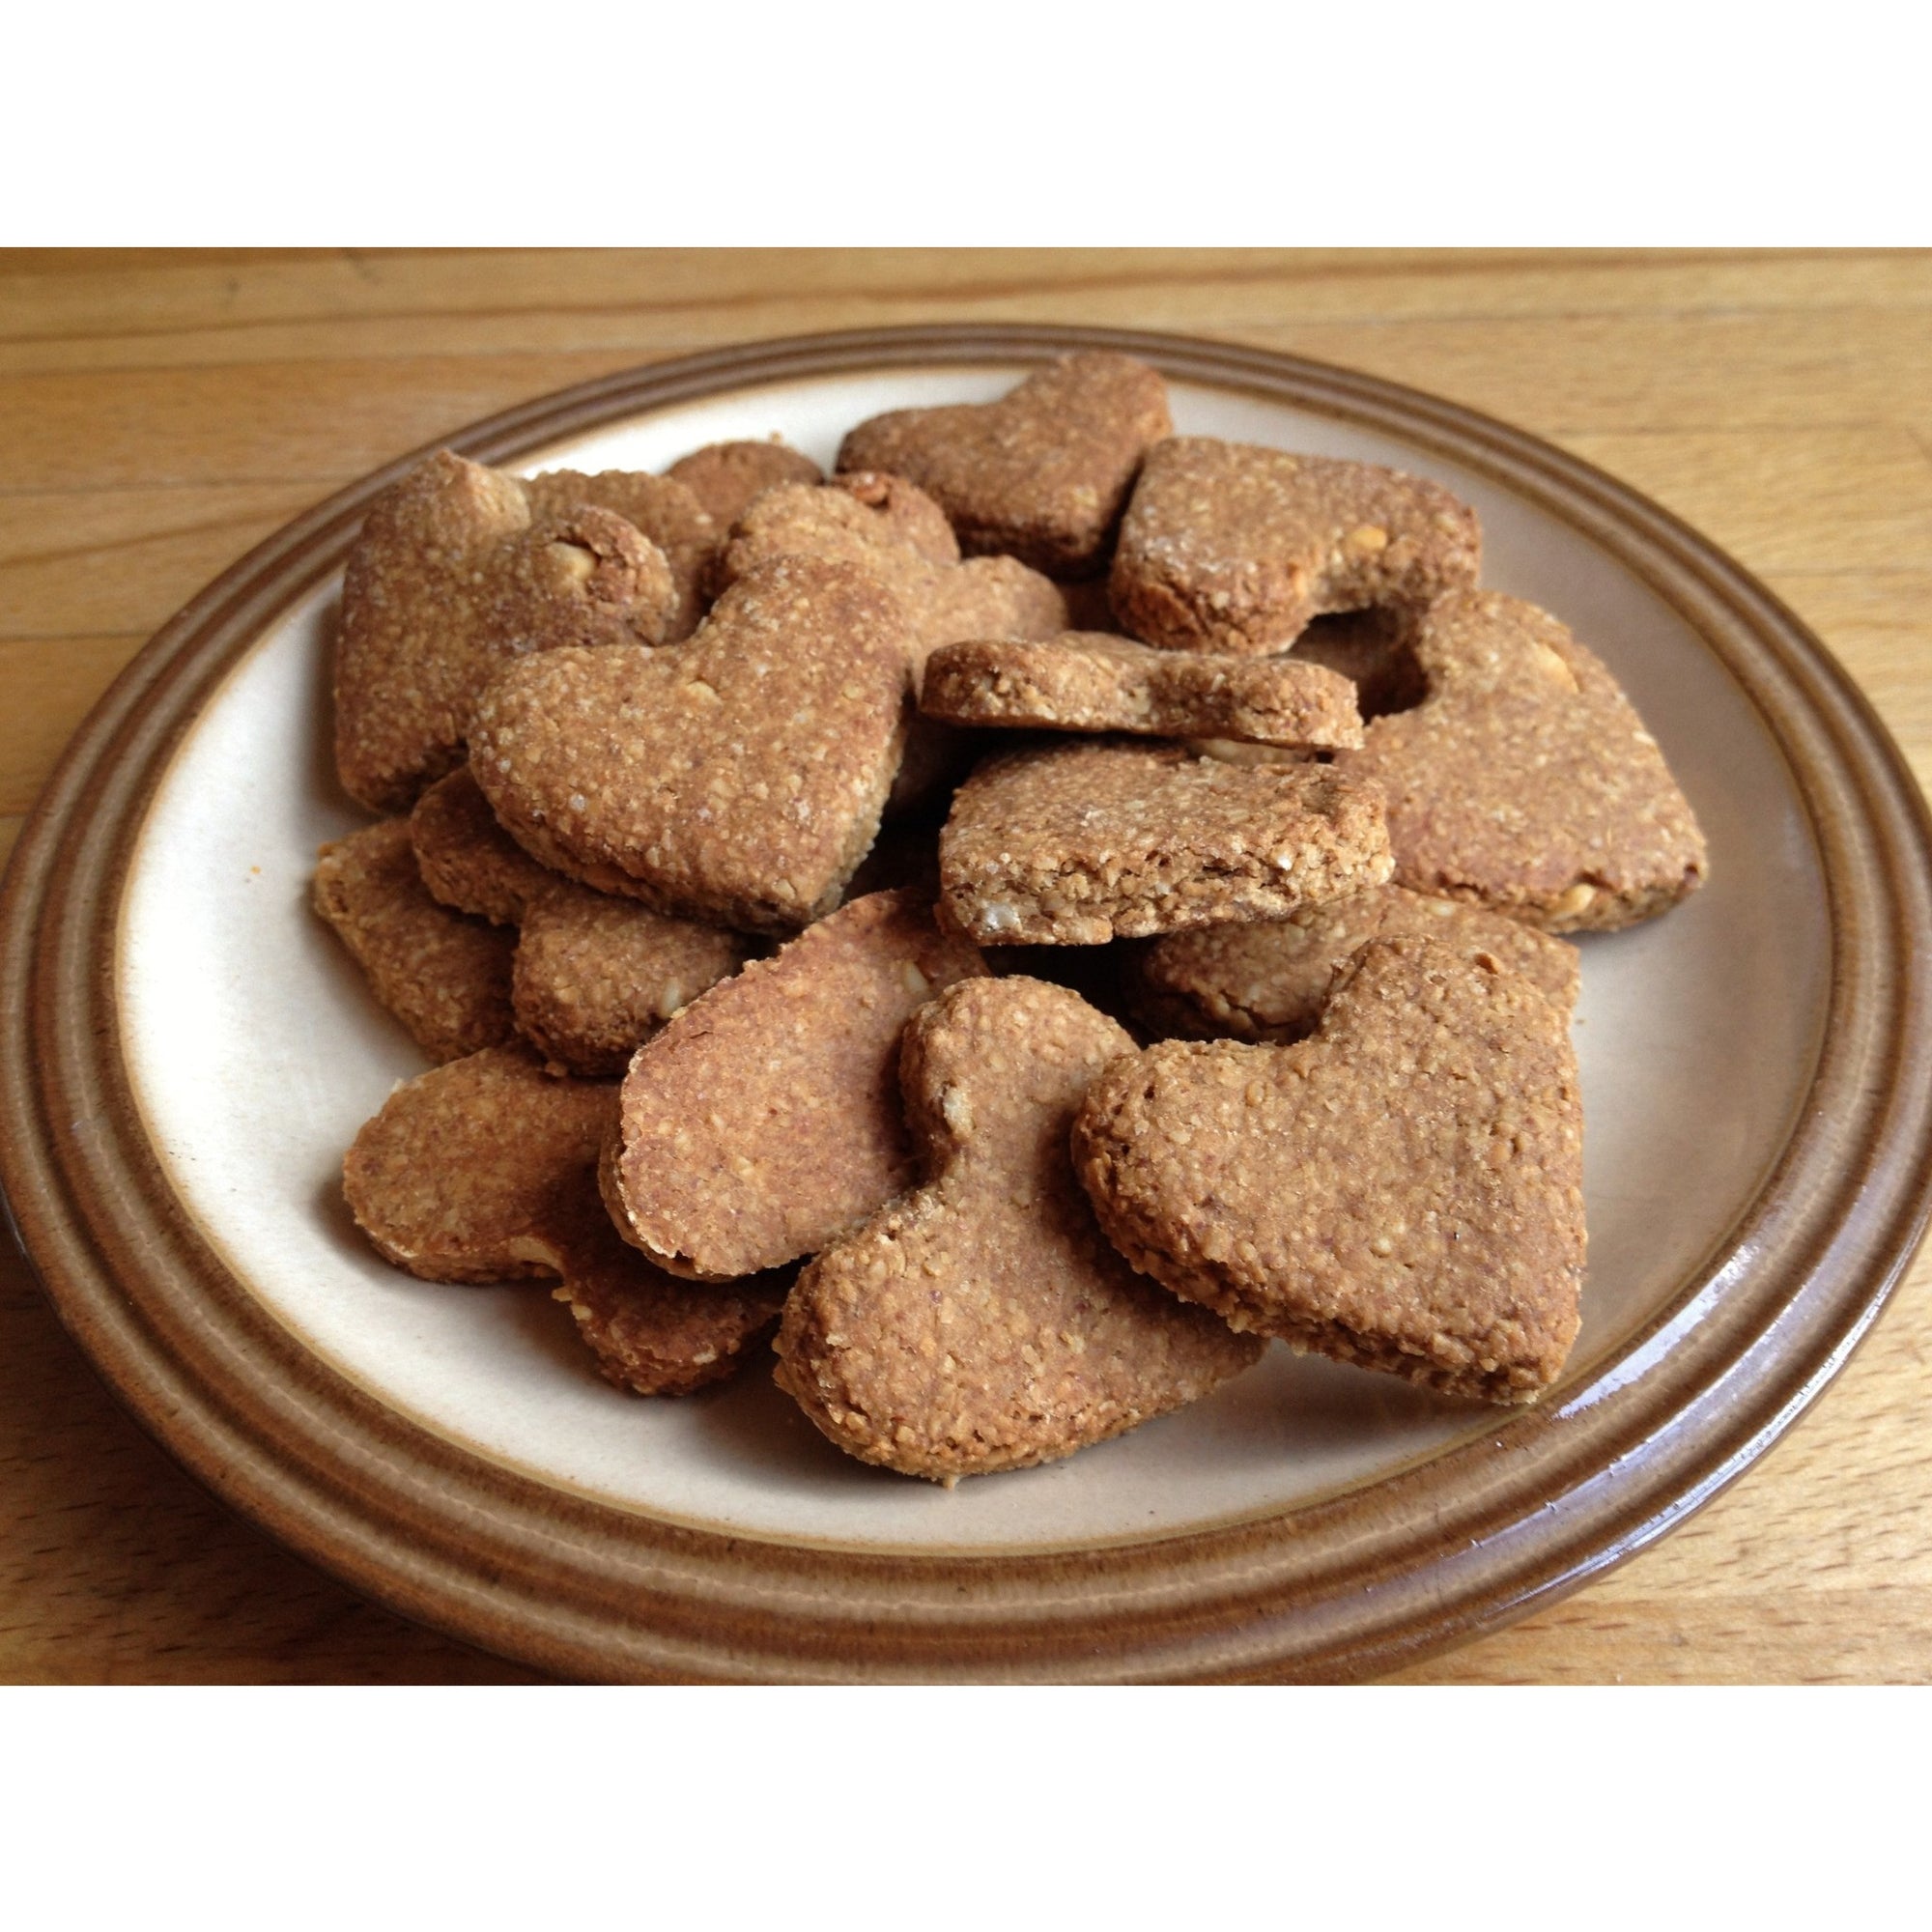 Peanut Butter & Banana Dog Biscuits